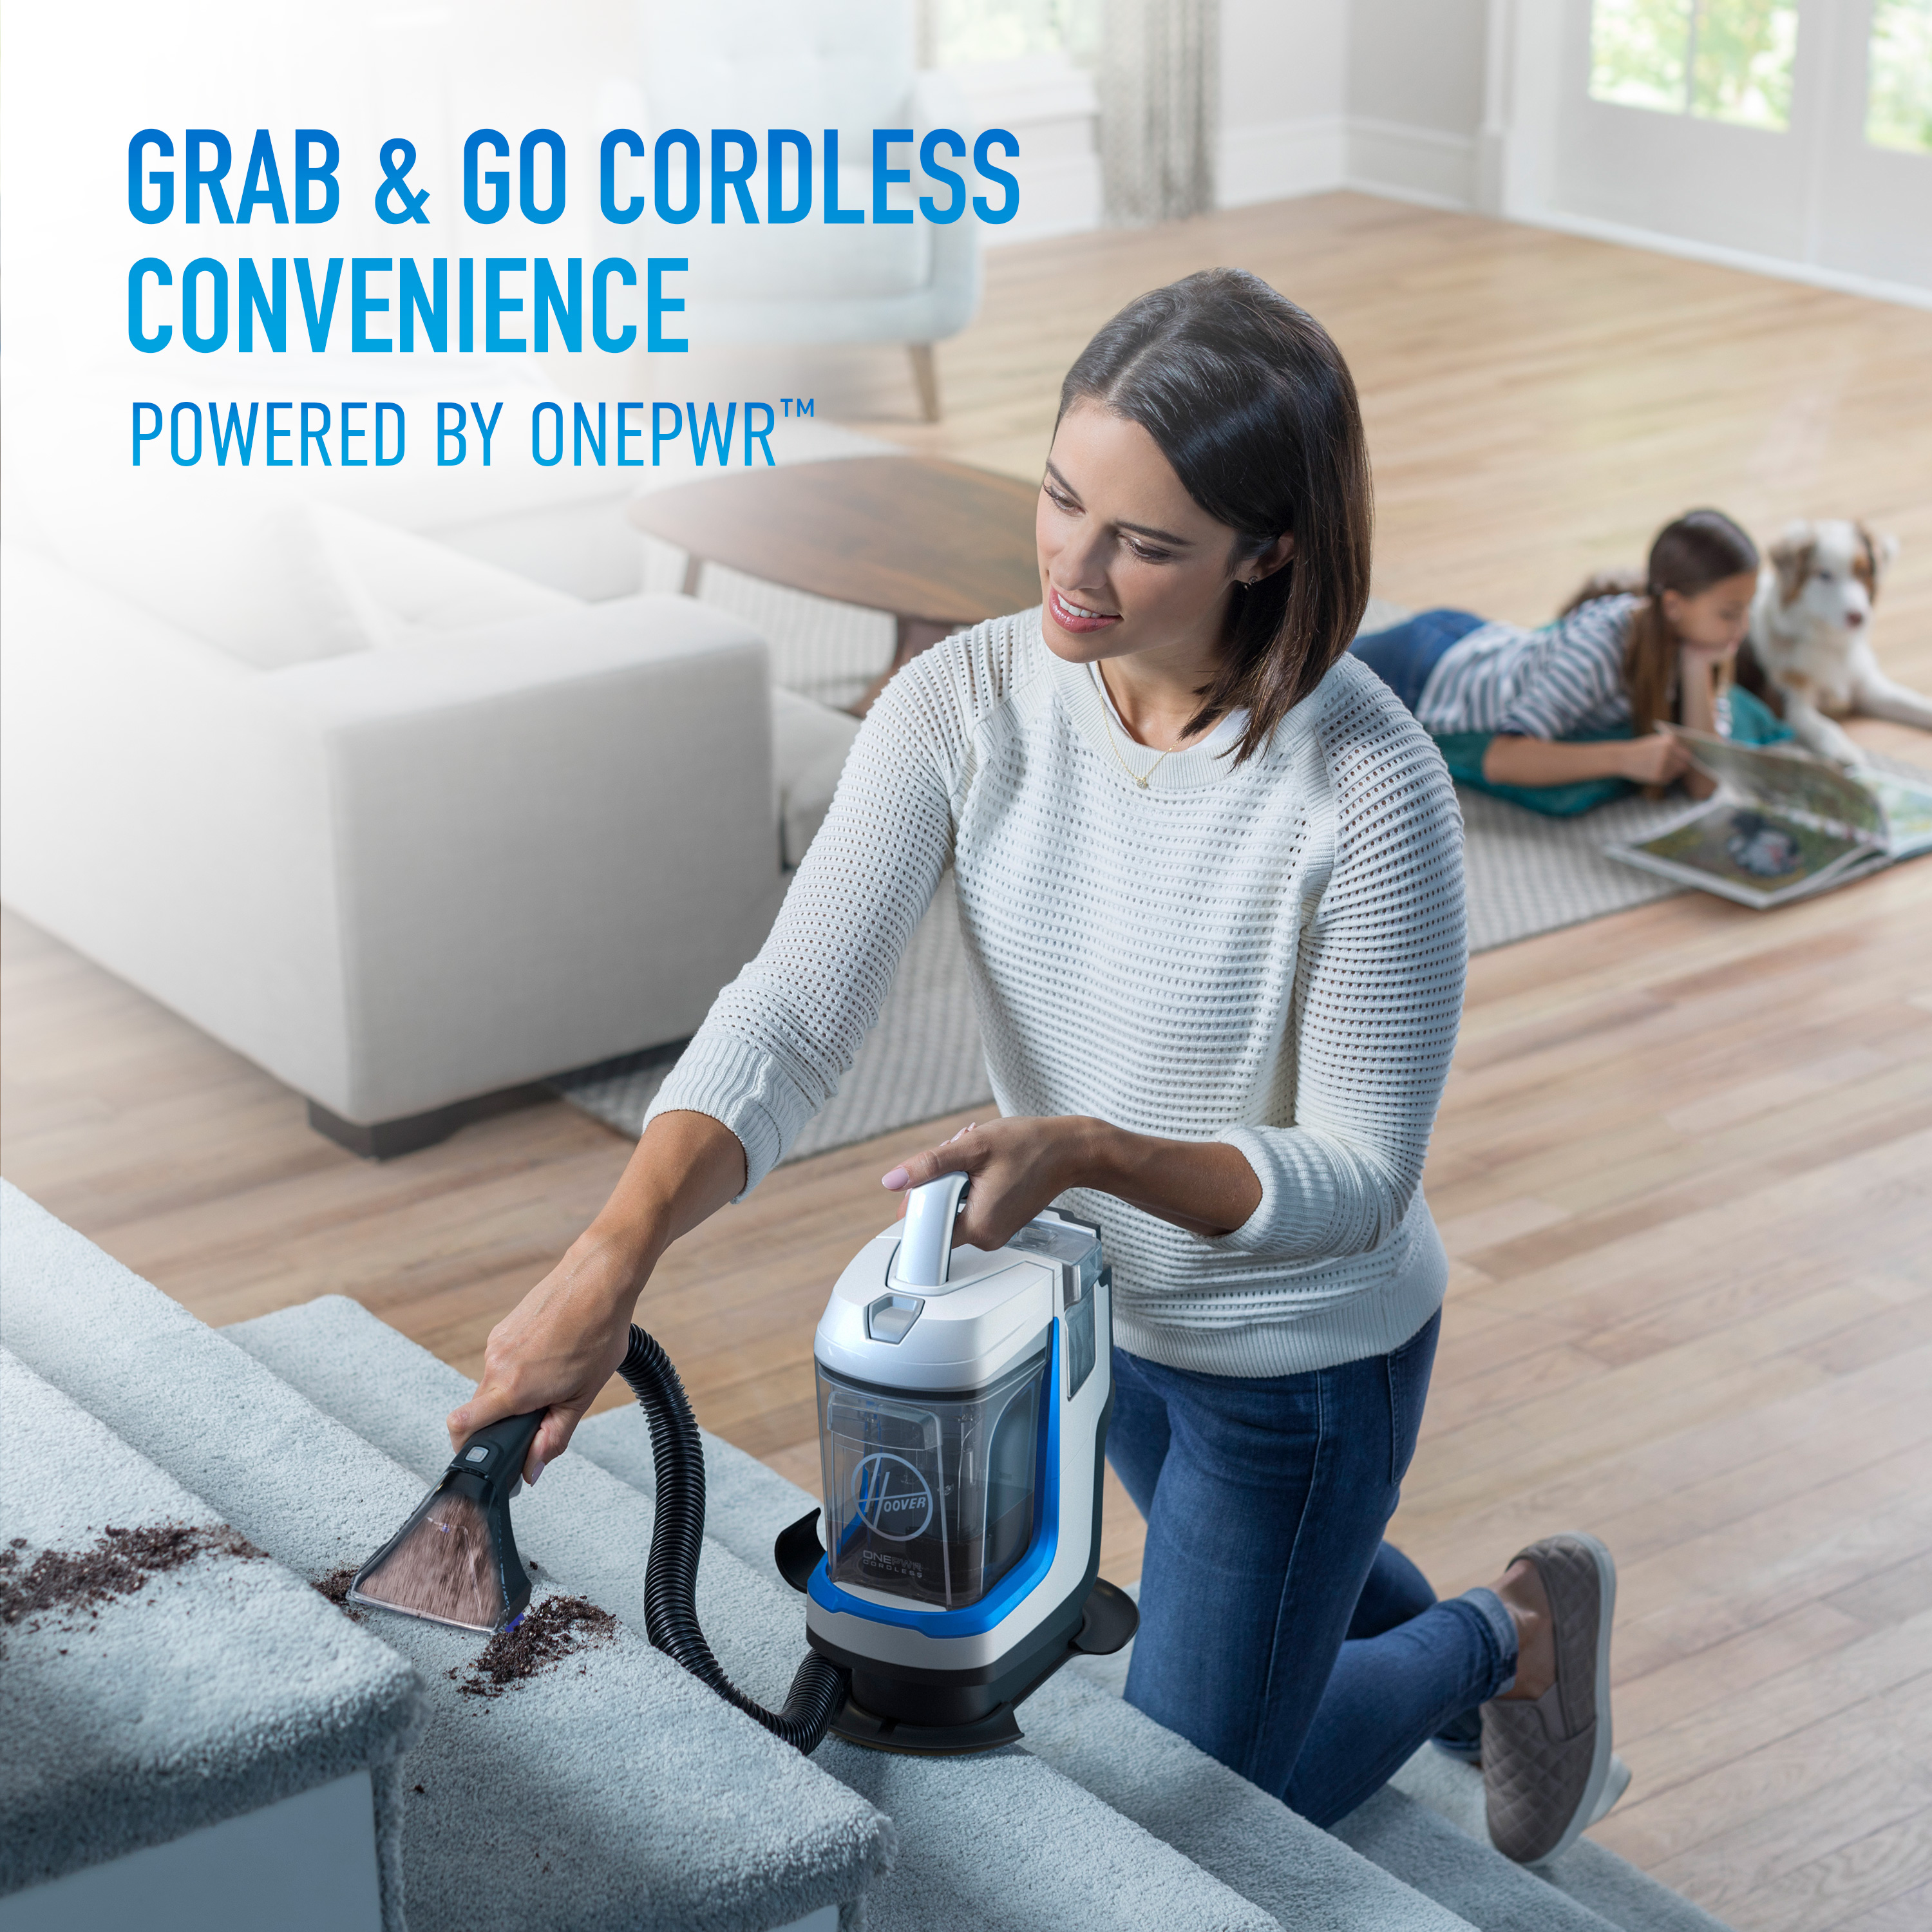 Hoover ONEPWR Spotless GO Cordless Portable Carpet Spot Cleaner, BH12001 - image 4 of 9